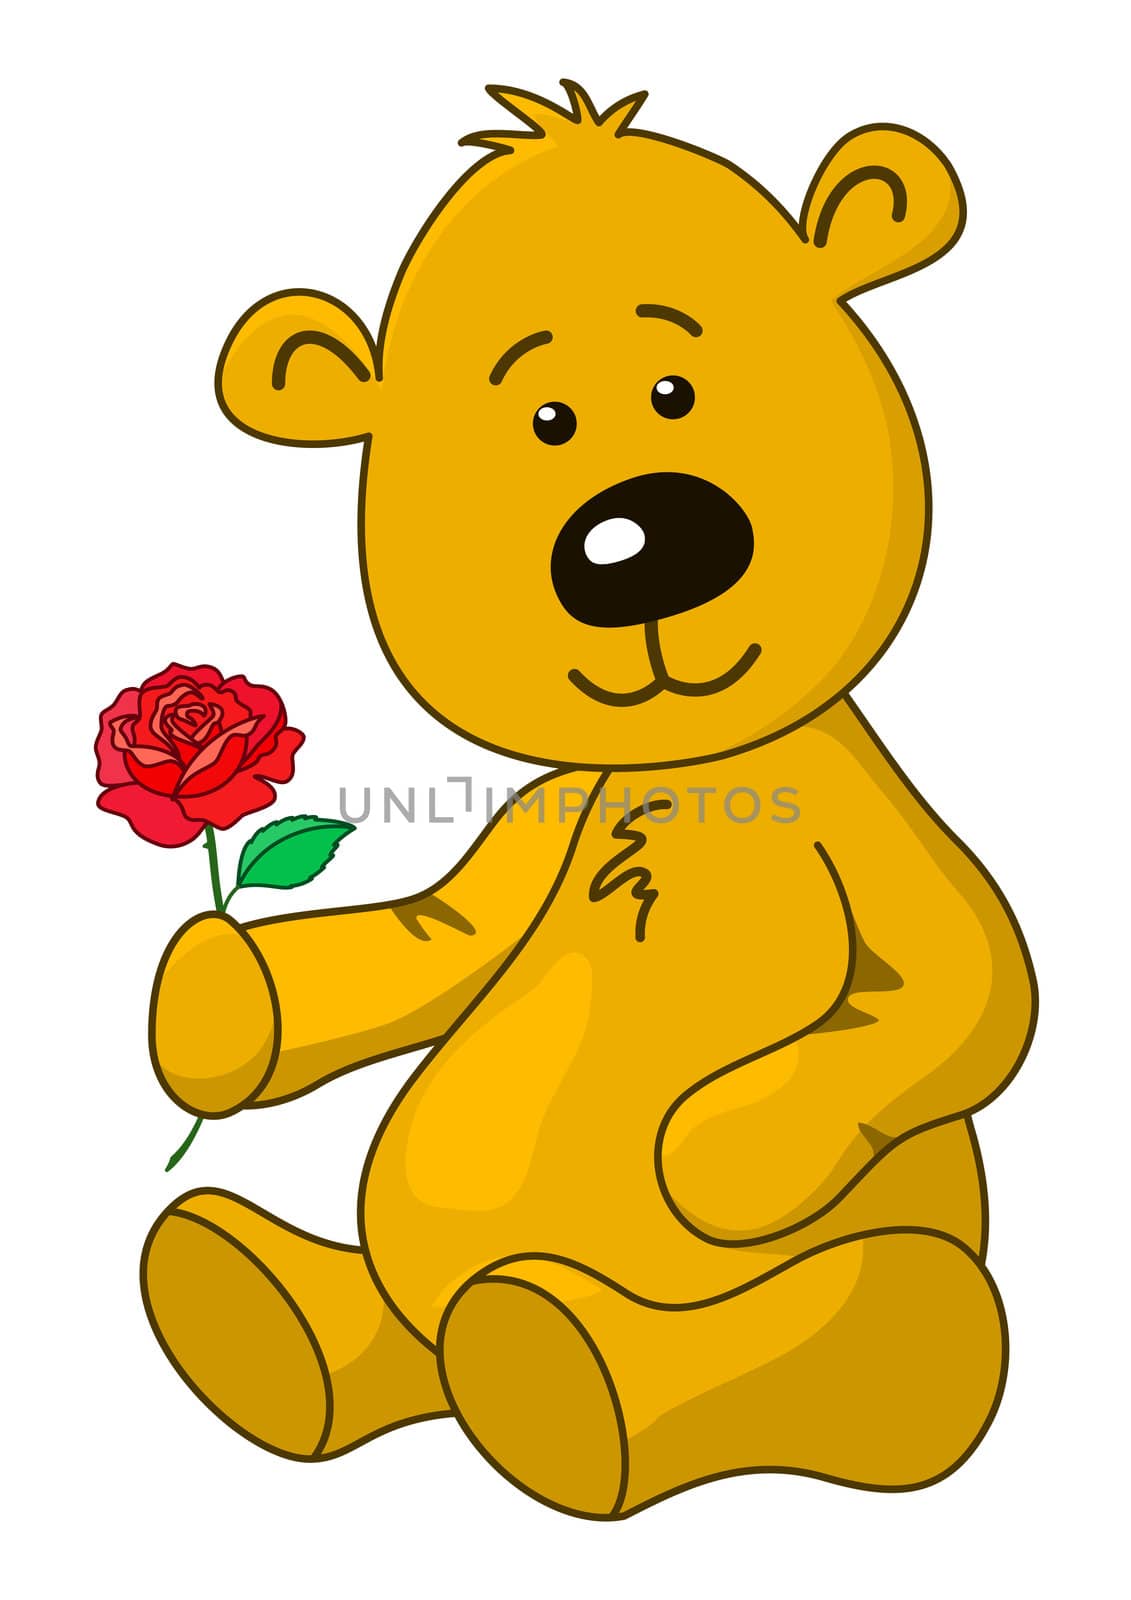 The kind teddy bear sits and holds a rose flower in a paw: it to you a gift